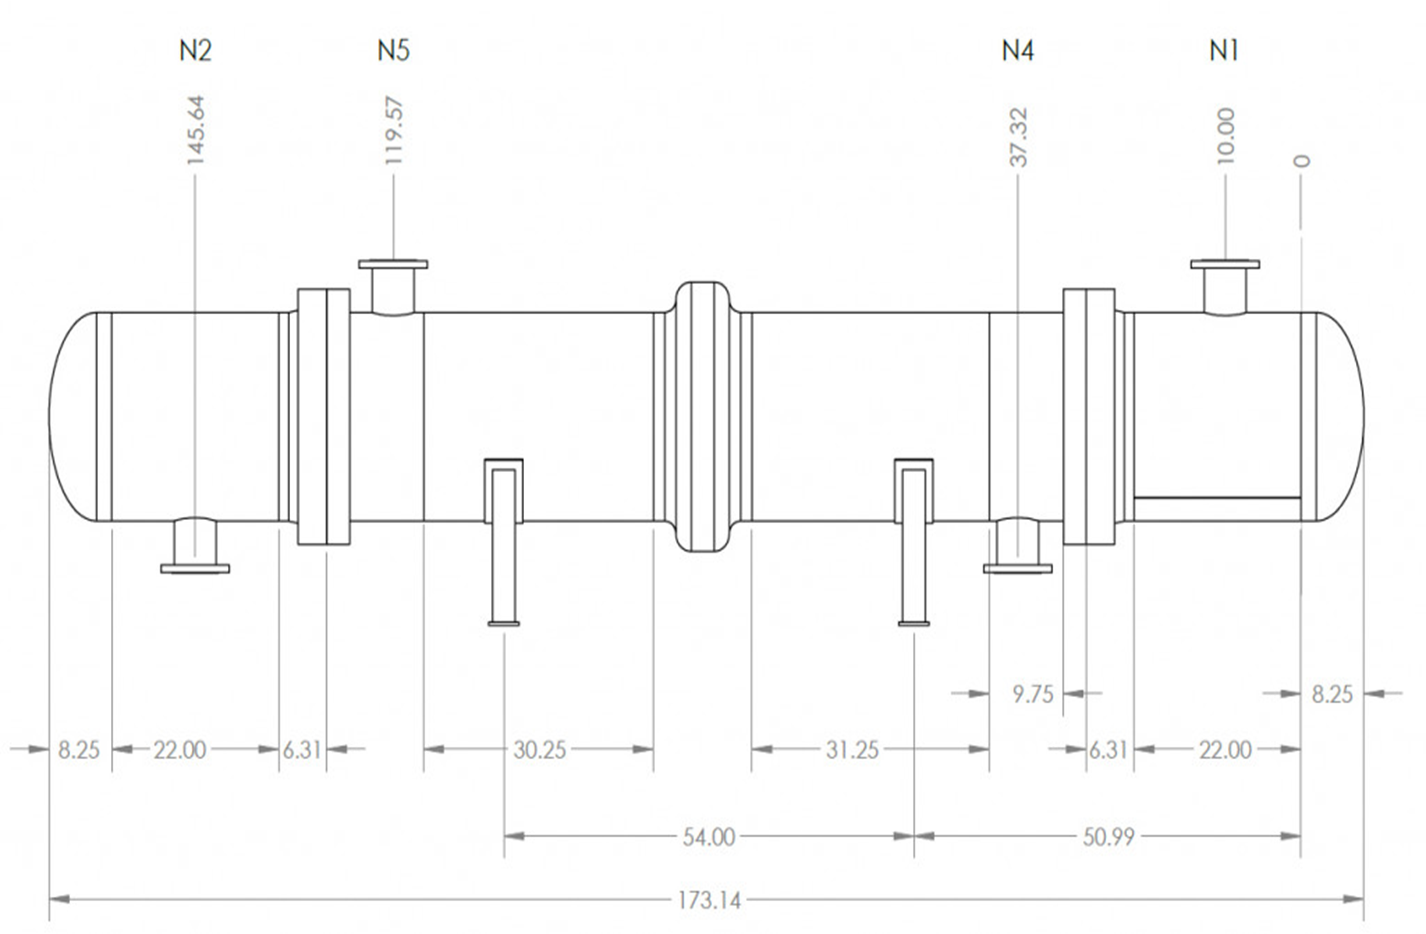 Heat Exchanger Drawing created by the Codeware Interface add-on